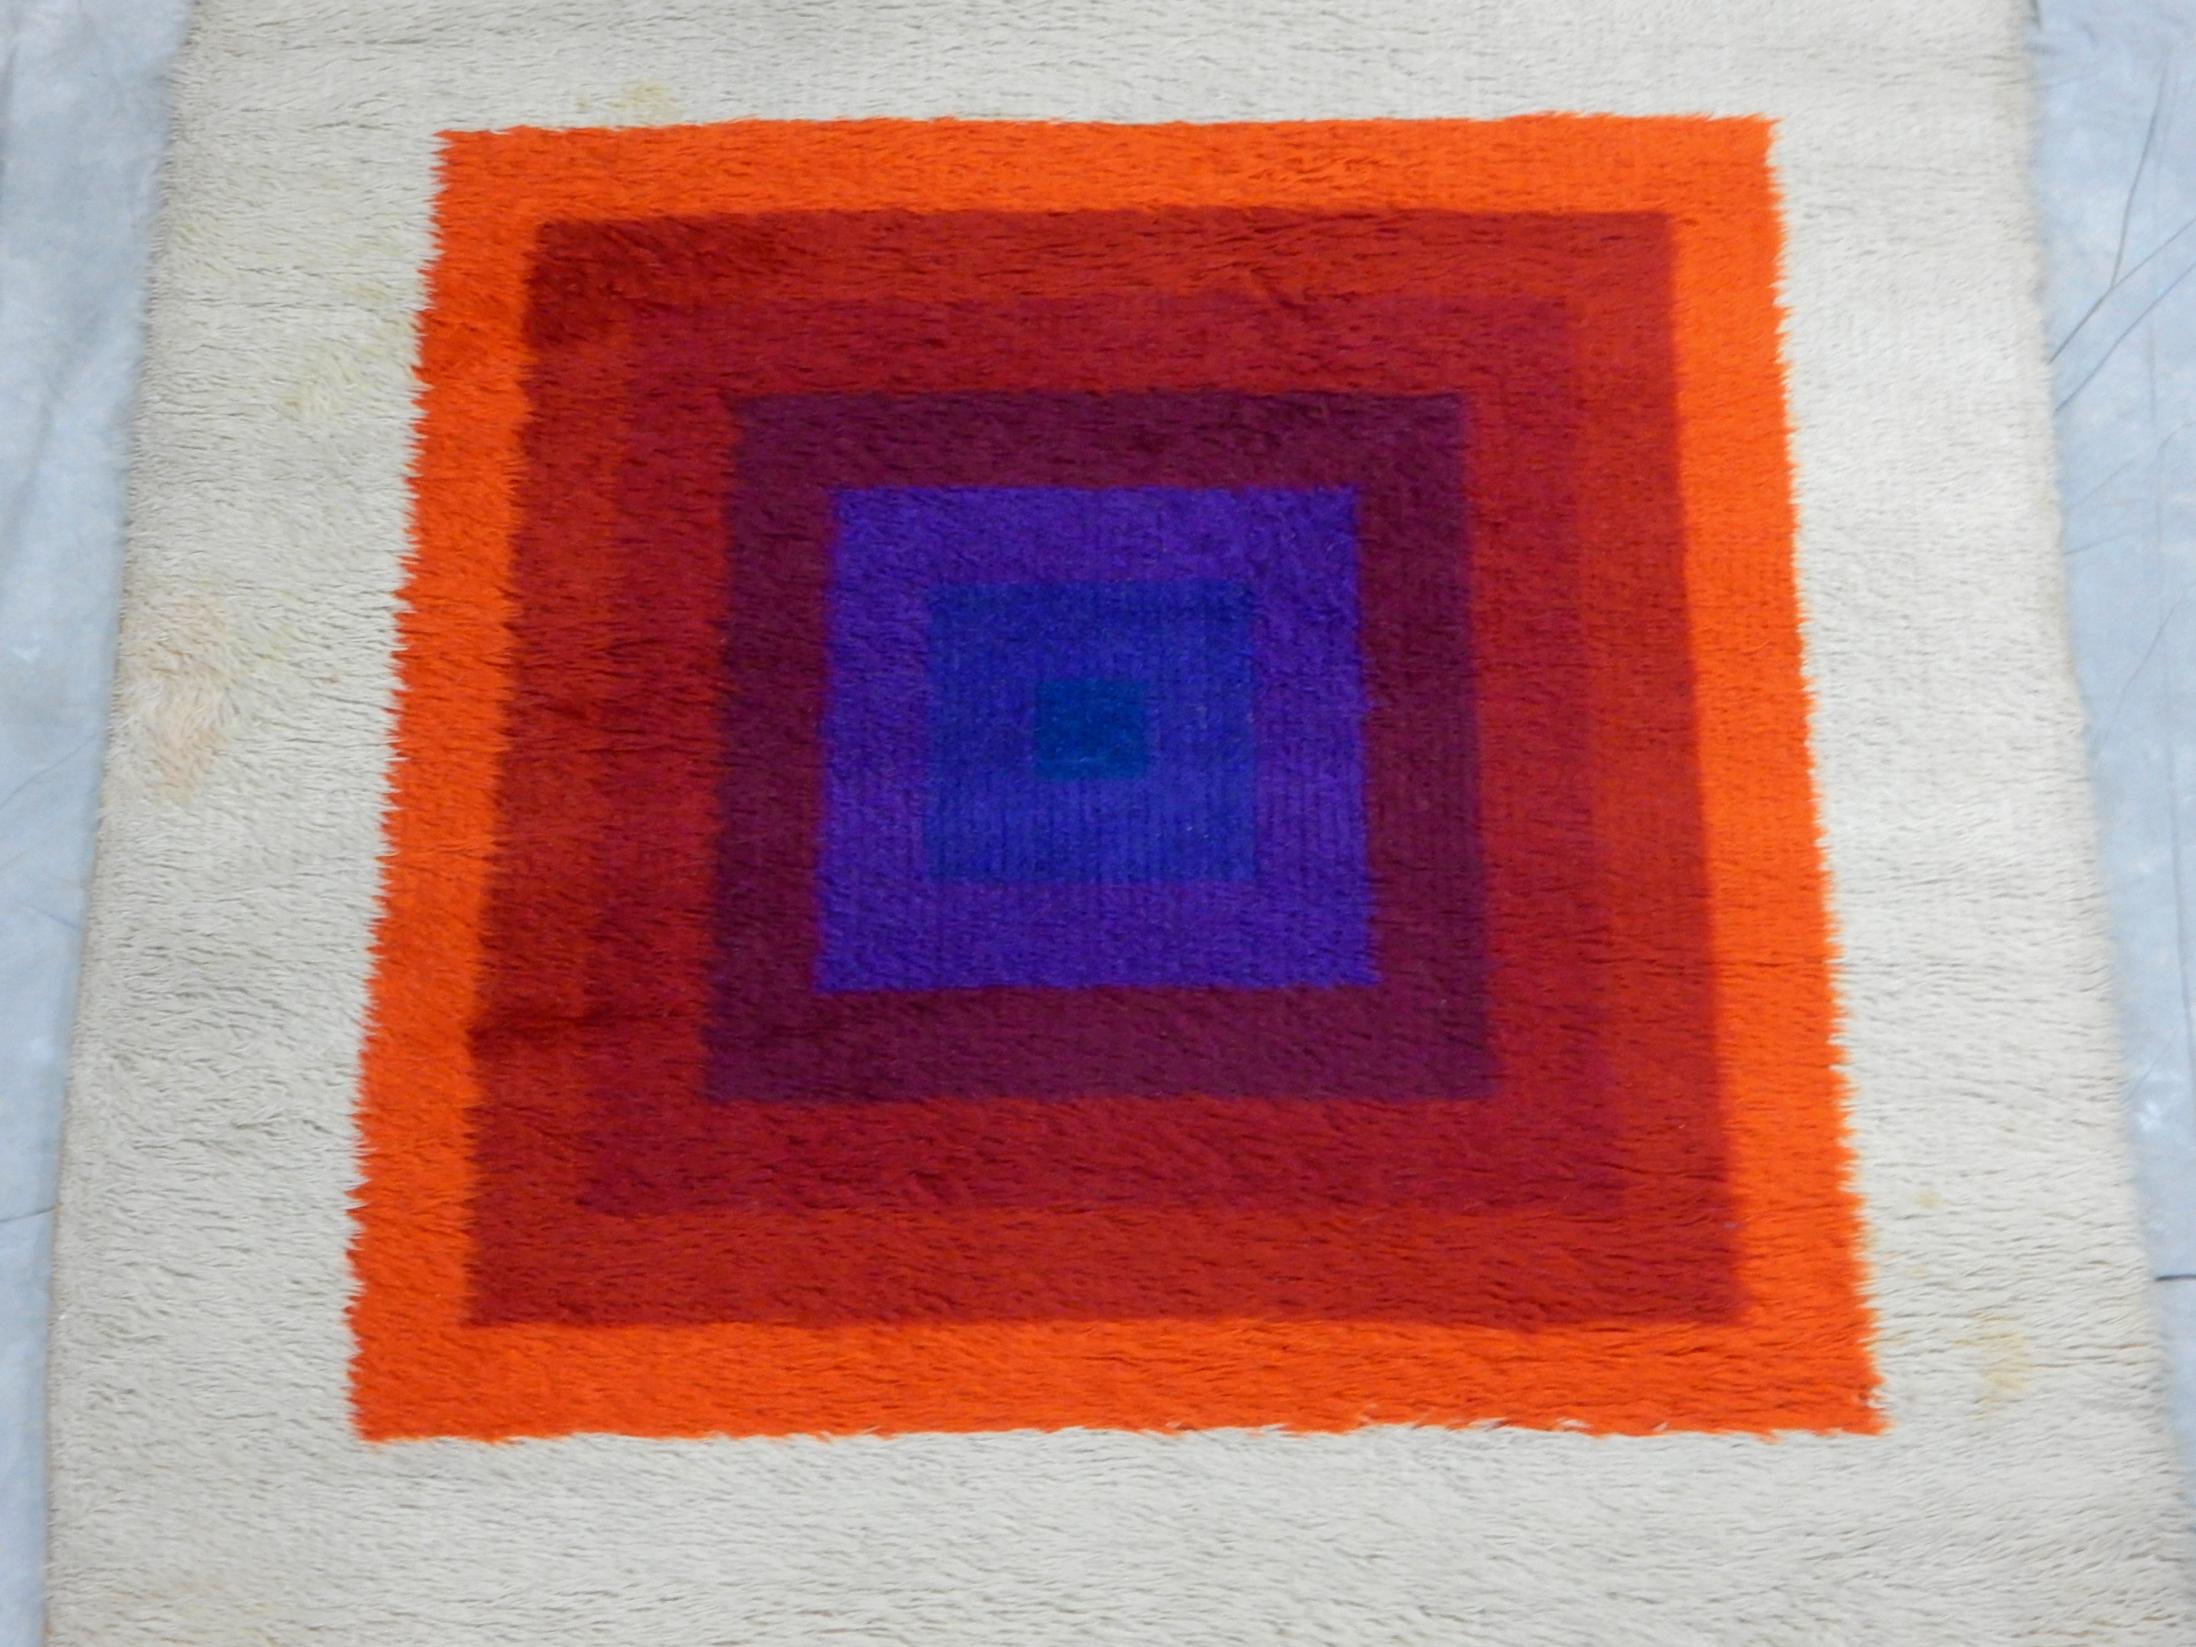 Rare original Verner Panton design 'Mira-Romantica' wool rya rug, circa 1970s.
Made in England. Colors are bold and bright.
A few light spots and soiling from use on floor. No odors.
No bald spots or damage. Measures 79in. x 54in. (6-1/2' X